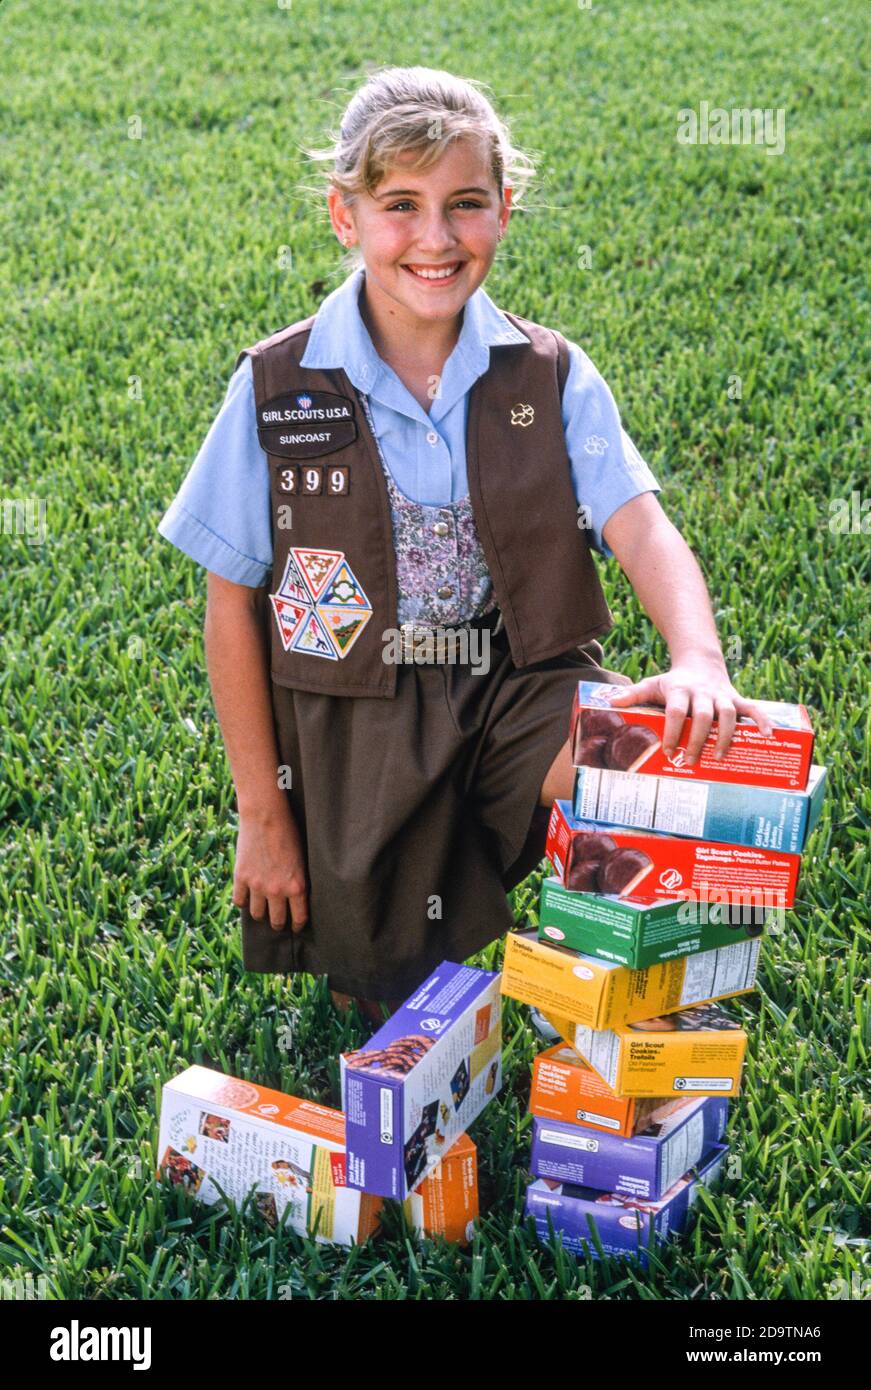 Smiling Young Girl Selling Girl Scout Cookies, USA Stock Photo